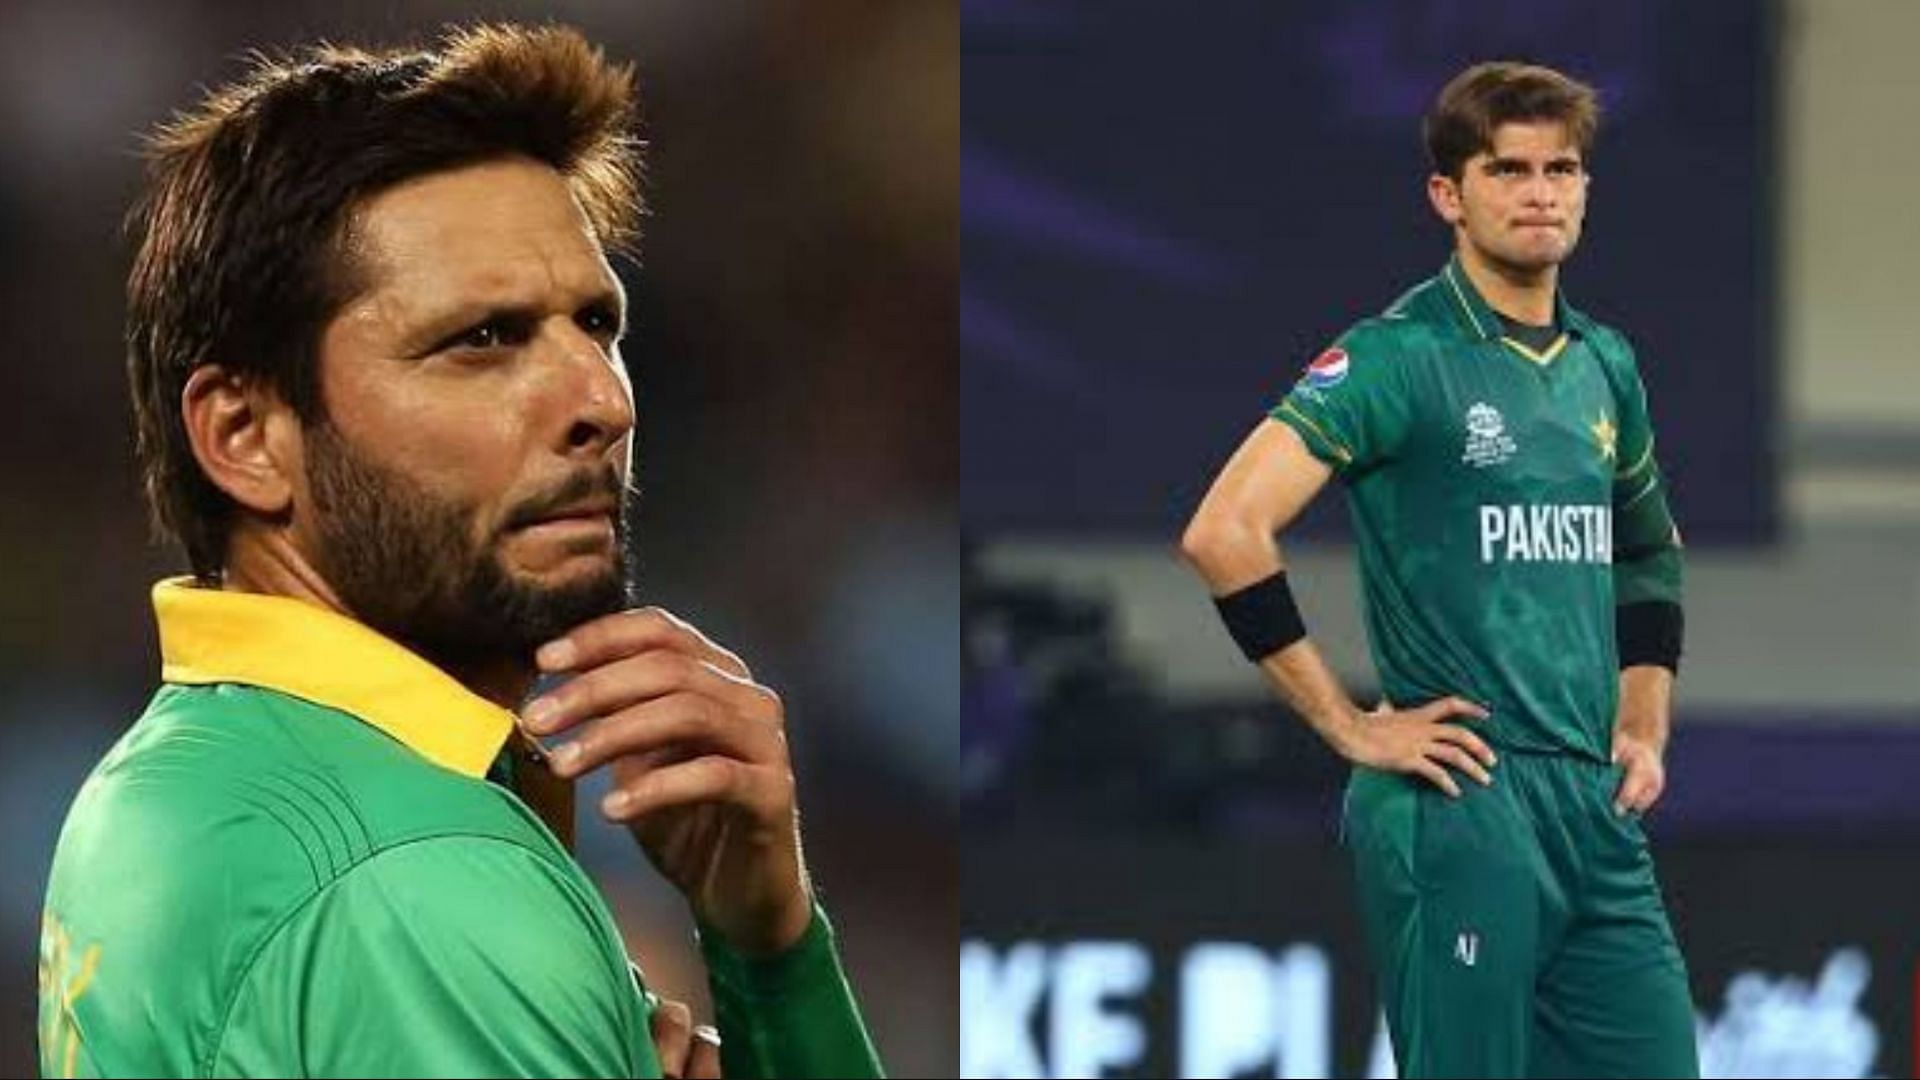 Shahid Afridi has commented on Shaheen Afridi&#039;s performance in the ICC T20 World Cup 2021 semifinal against Australia.